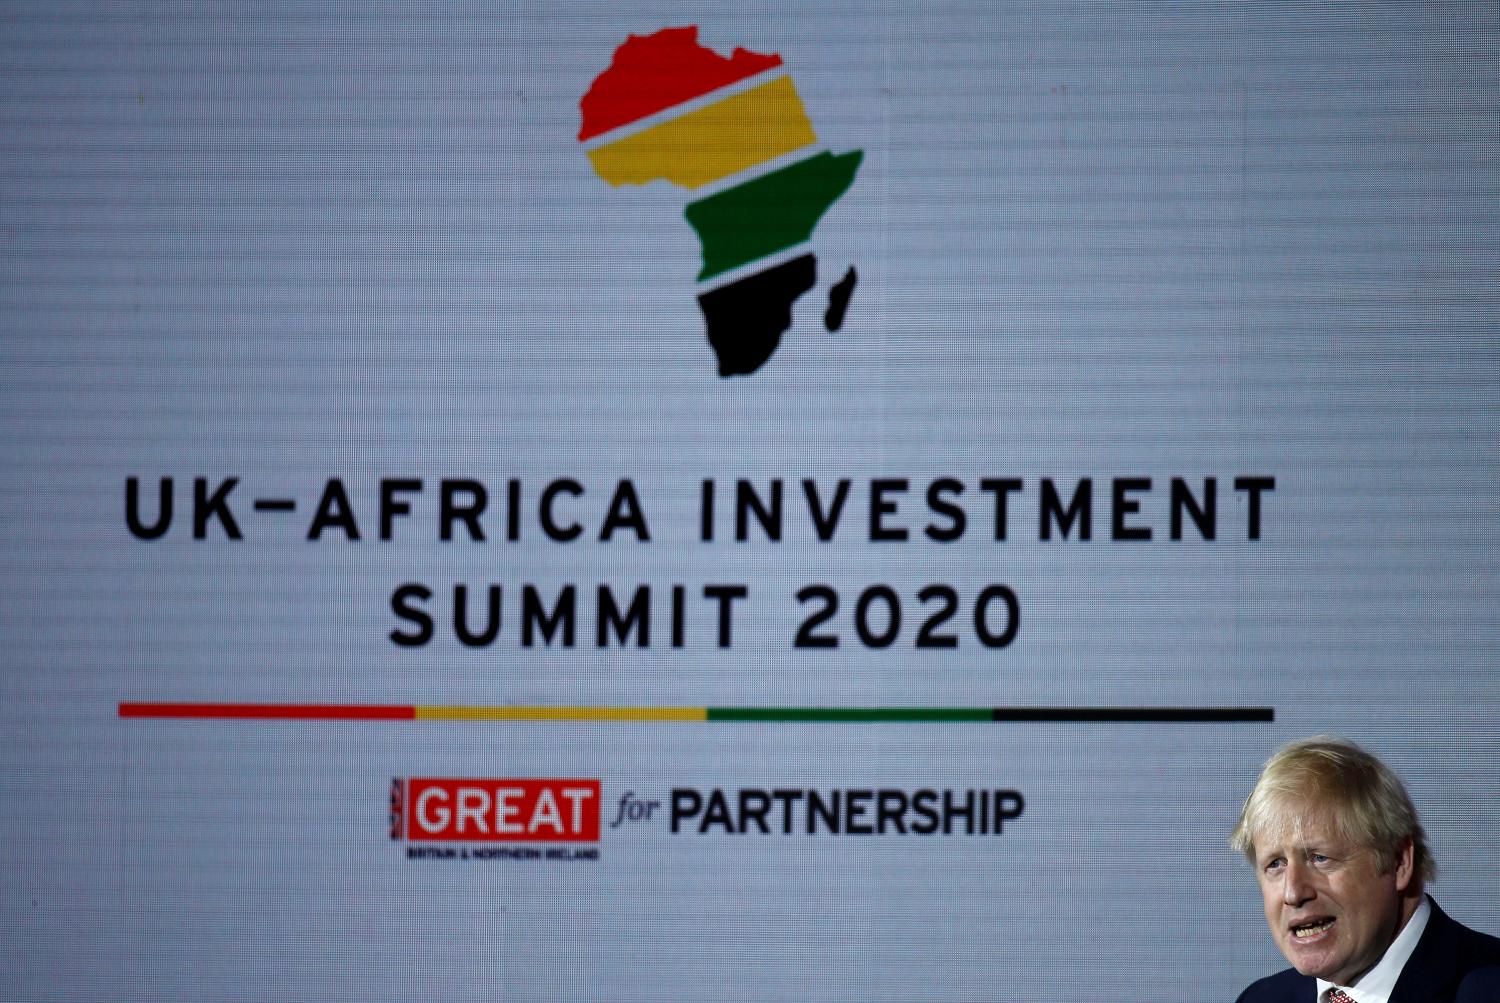 Britain's Prime Minister Boris Johnson speaks at the UK-Africa Investment Summit in London, Britain January 20, 2020. REUTERS/Henry Nicholls